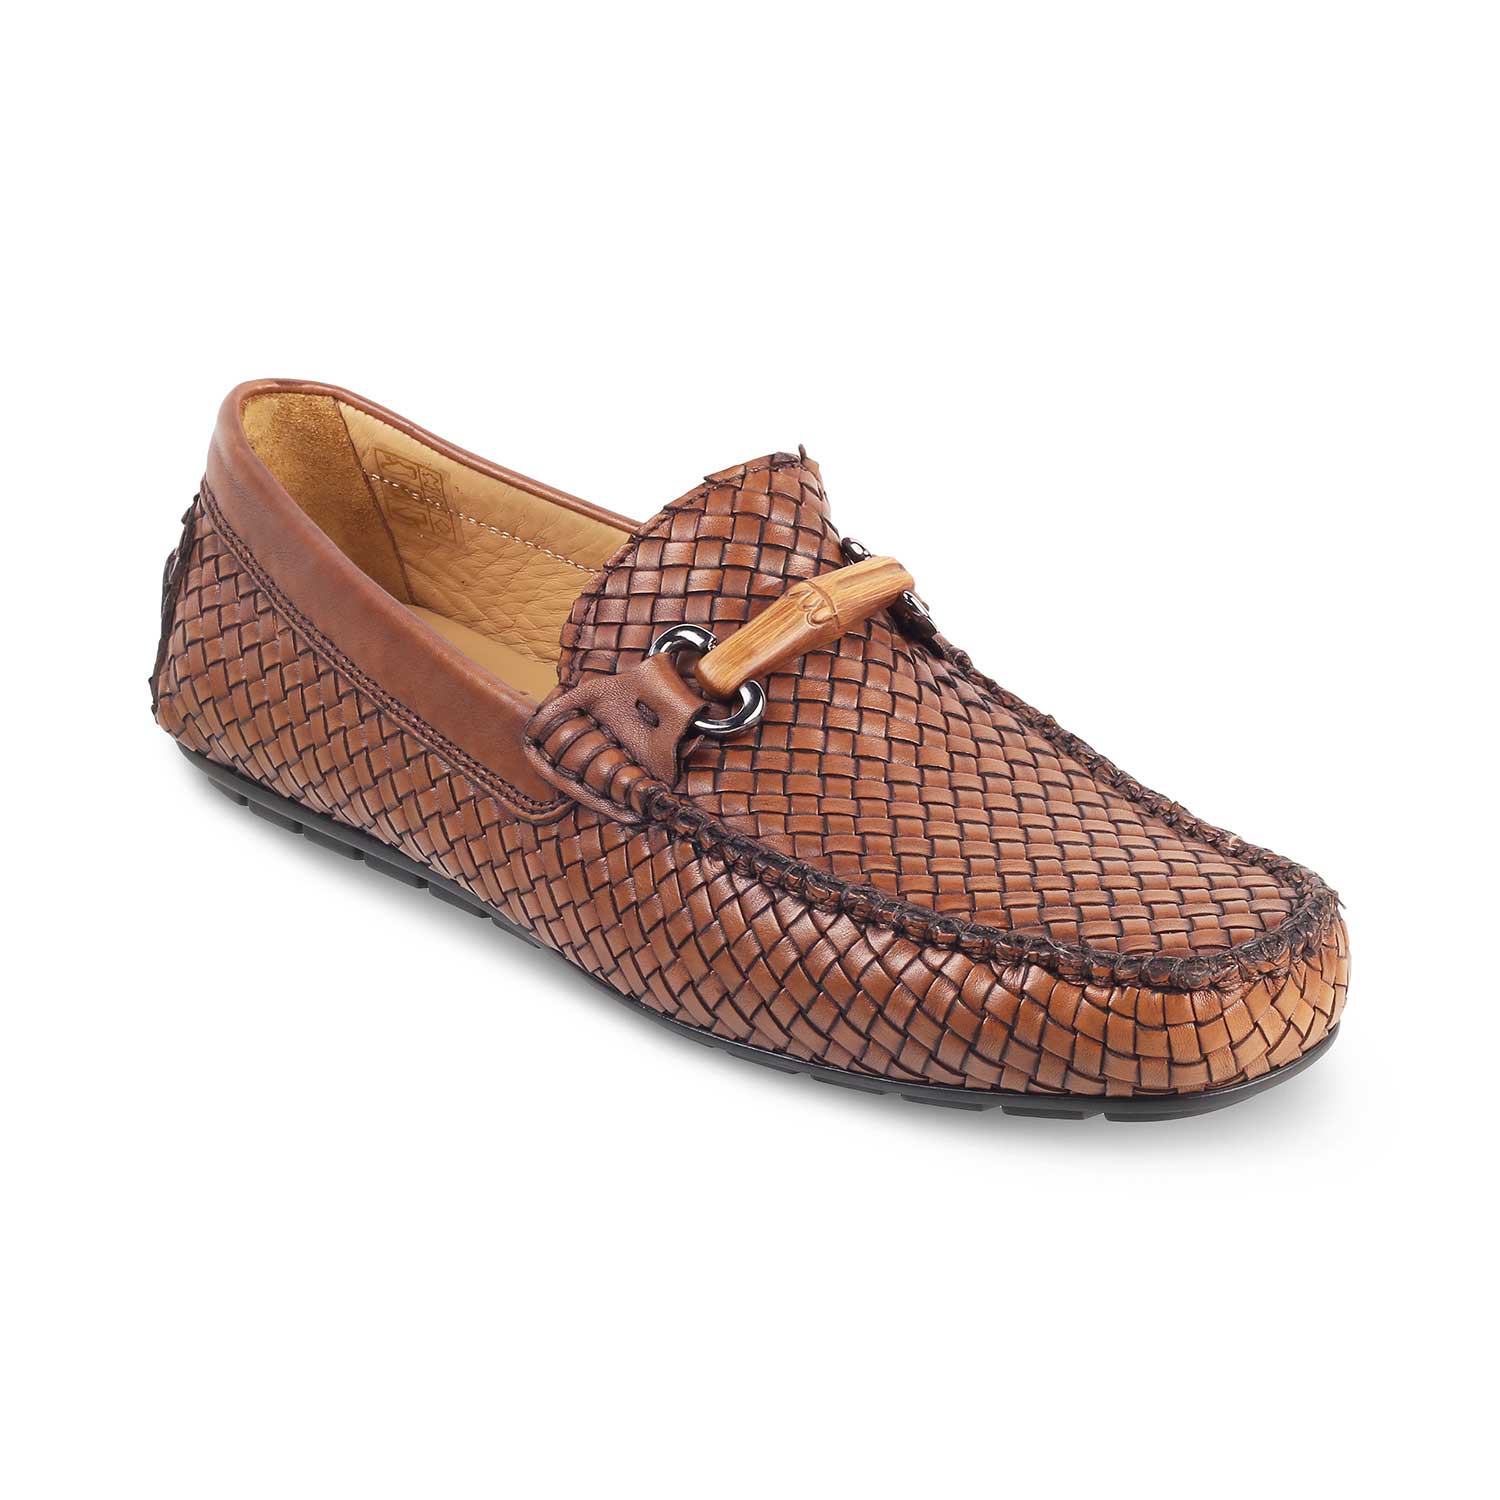 Tresmode-The Florenz Brown Men's Handcrafted Leather Driving Loafers Tresmode-Tresmode